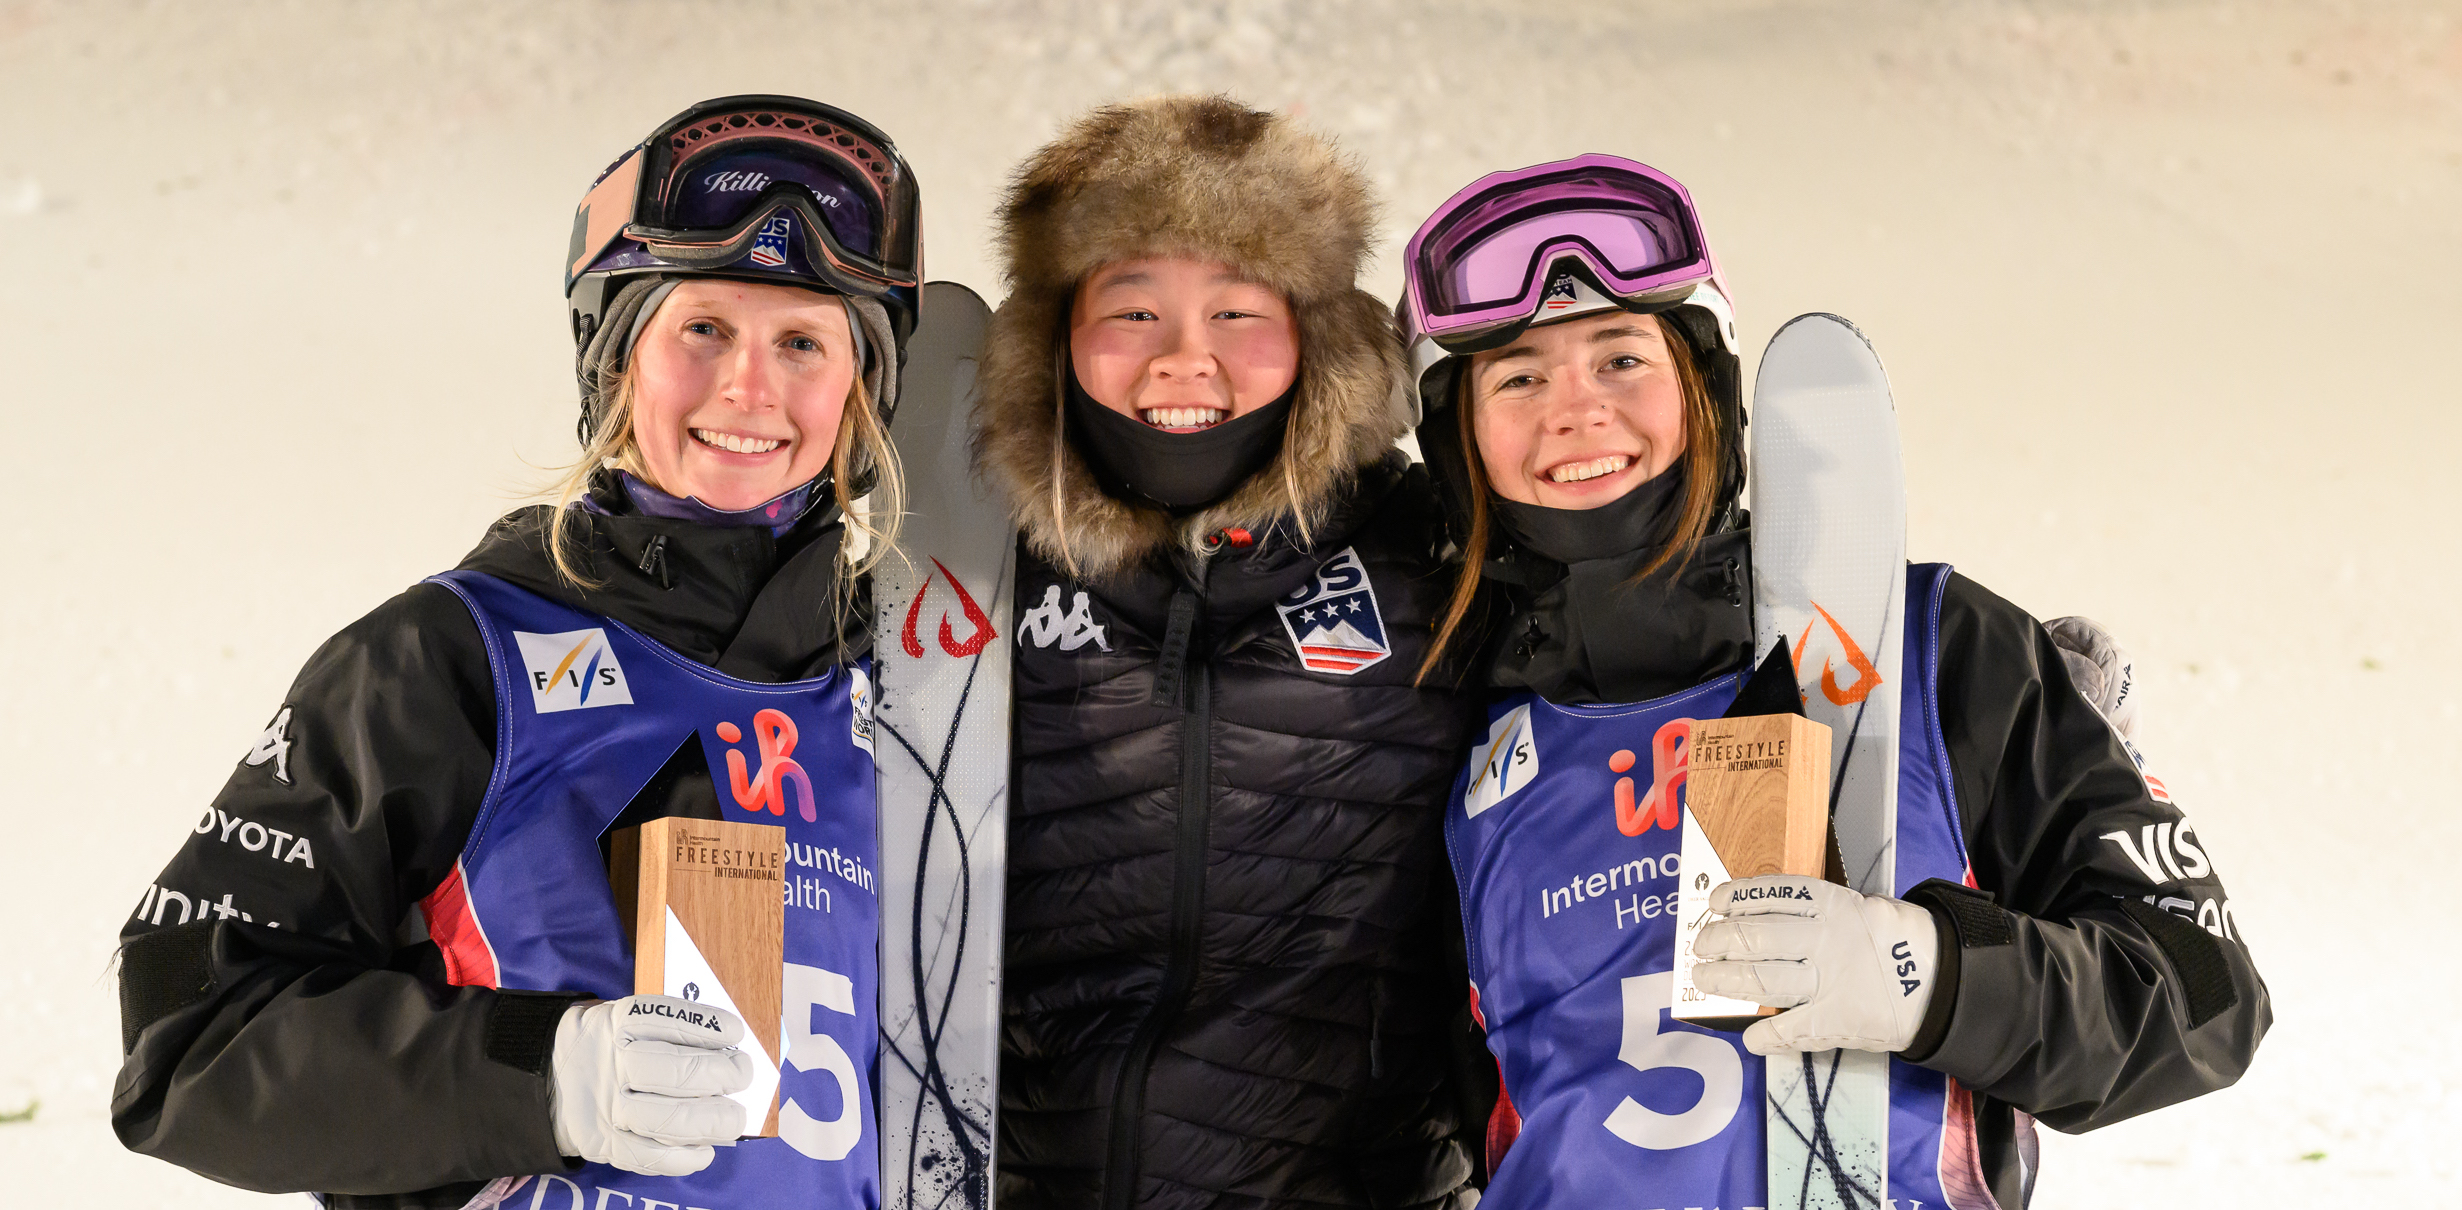 Jaelin Kauf, Kai Owens, and Hannah Soar smile with trophies at the 2023 Deer Valley World Cup